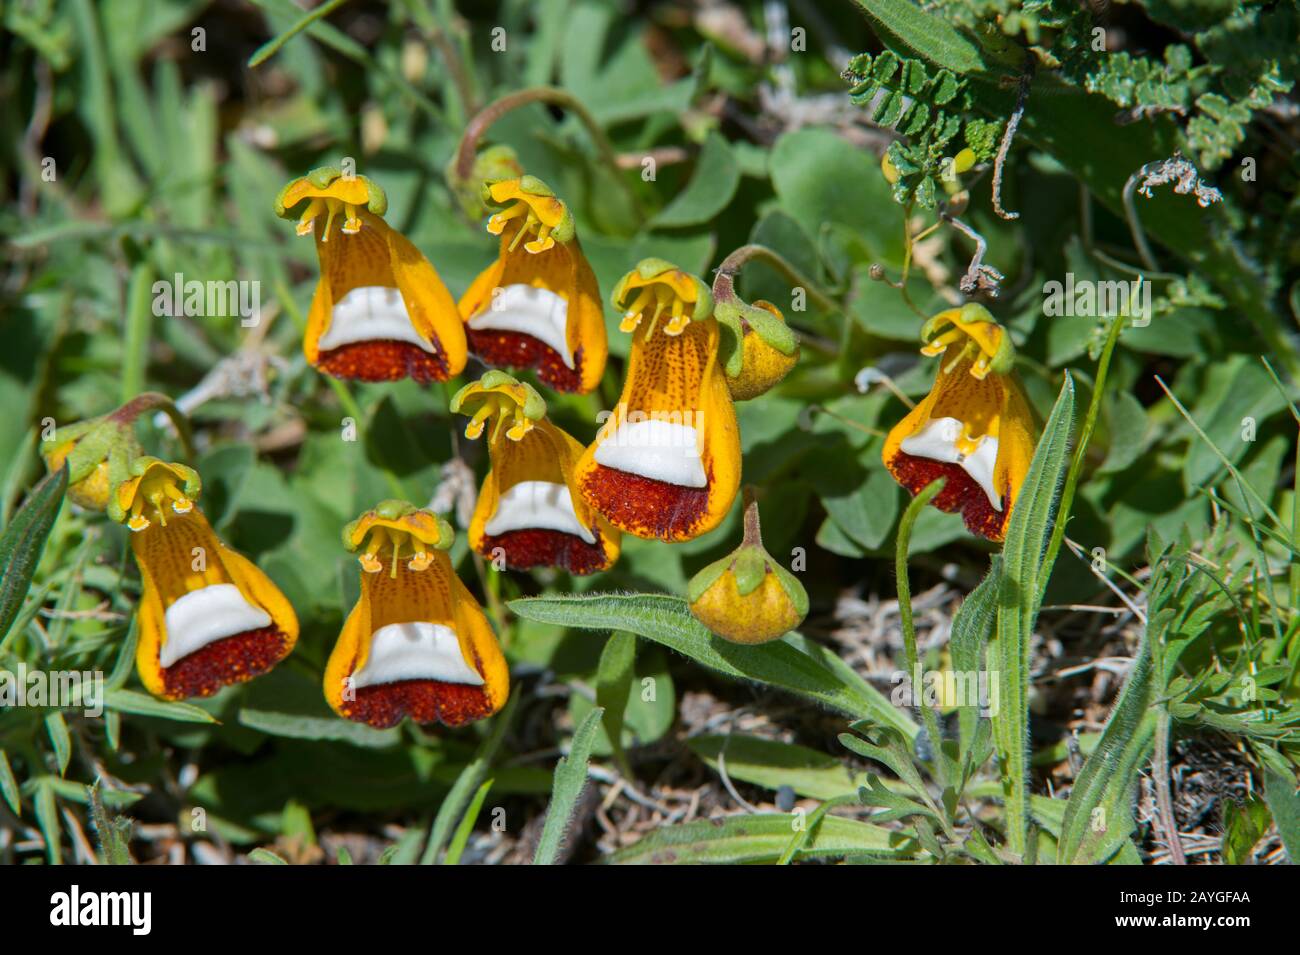 Ladys slipper (Calceolaria uniflora) wildflowers in Torres del Paine National Park in Patagonia, Chile. Stock Photo